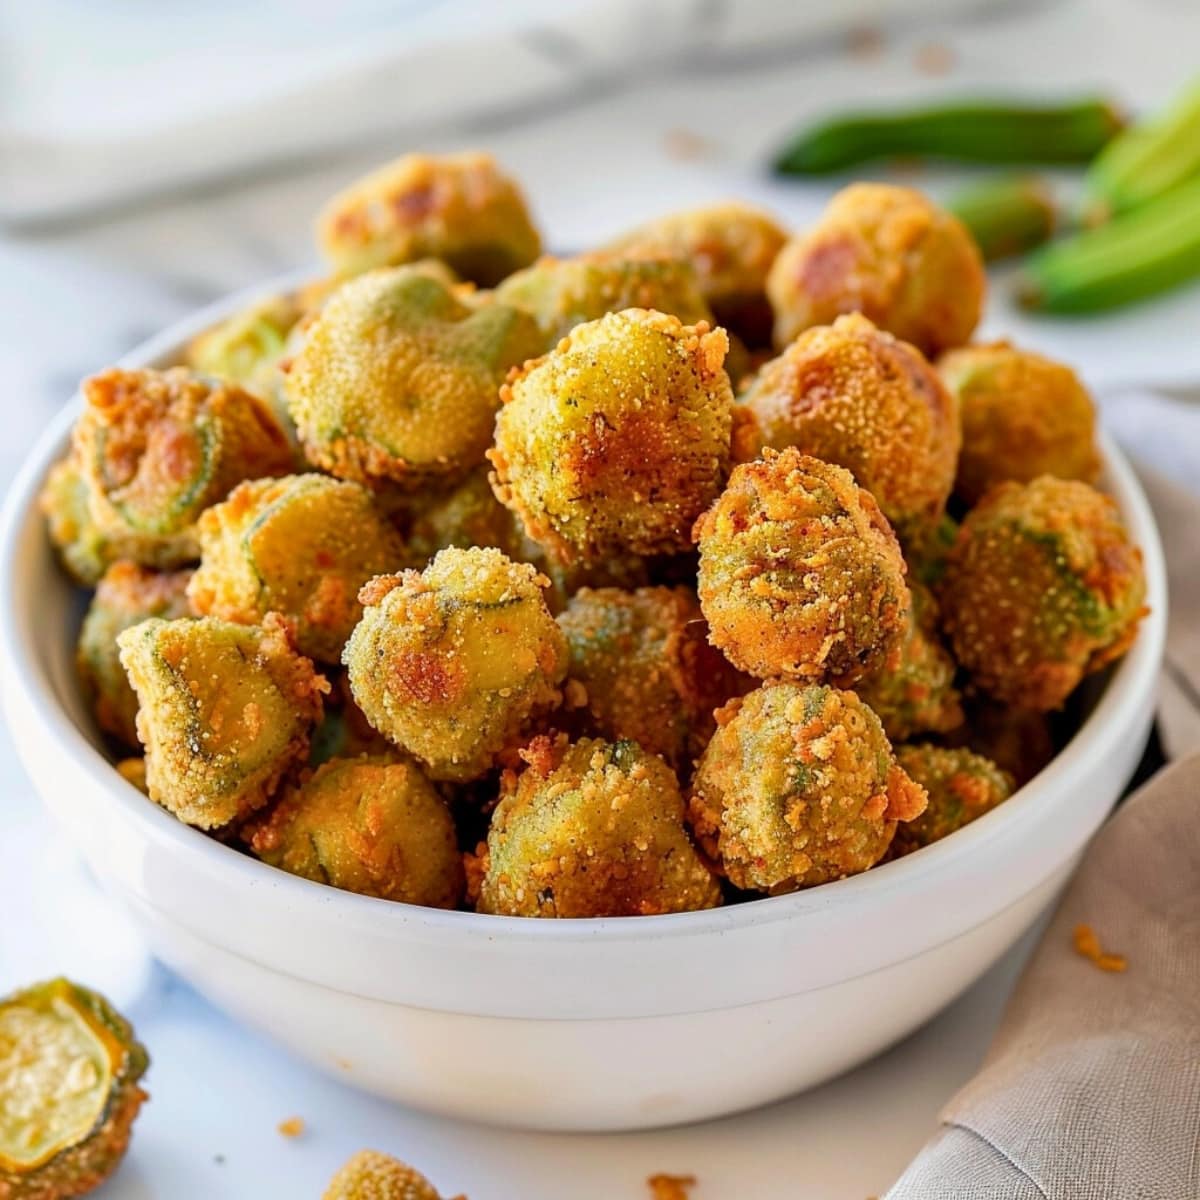 Bunch of fried okra coated with cornmeal batte ron a white bowl.